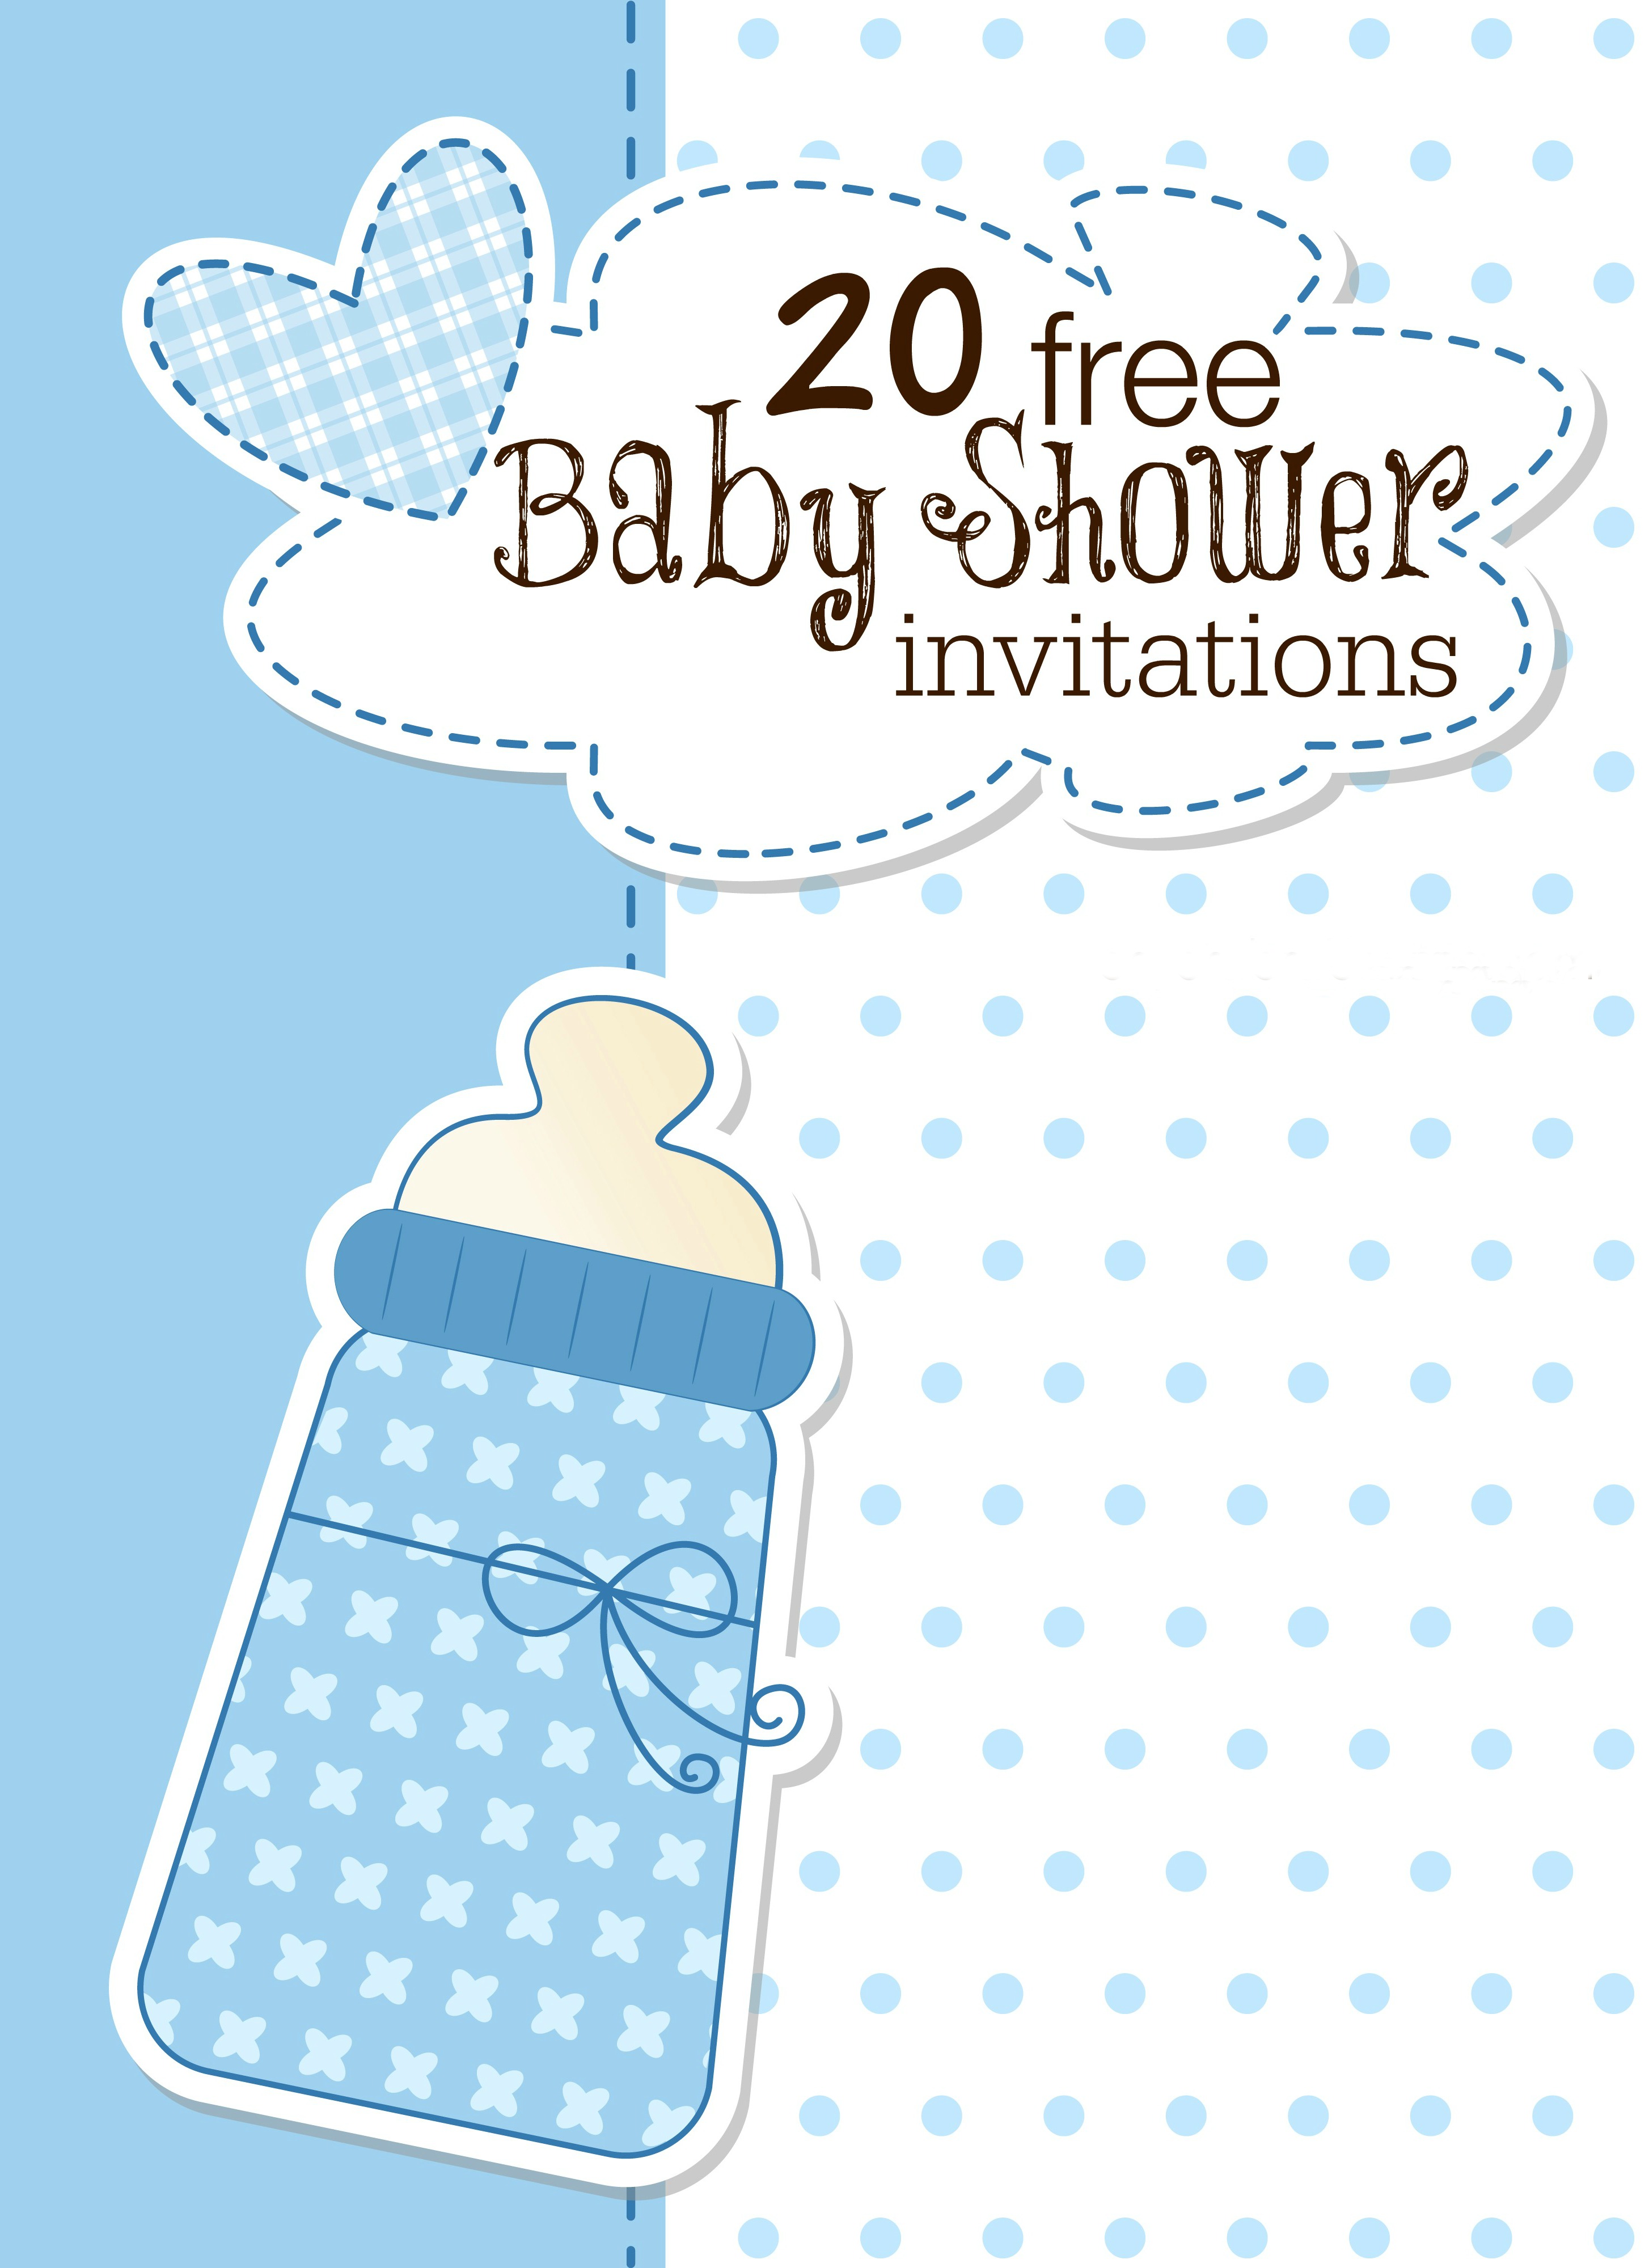 Full Size of Baby Shower:unique Baby Shower Themes Homemade Baby Shower Decorations Baby Shower Invitations Baby Girl Themes Nautical Baby Shower Invitations For Boys Baby Girl Themes For Bedroom Baby Shower Ideas Baby Shower Decorations Themes For Baby Girl Nursery